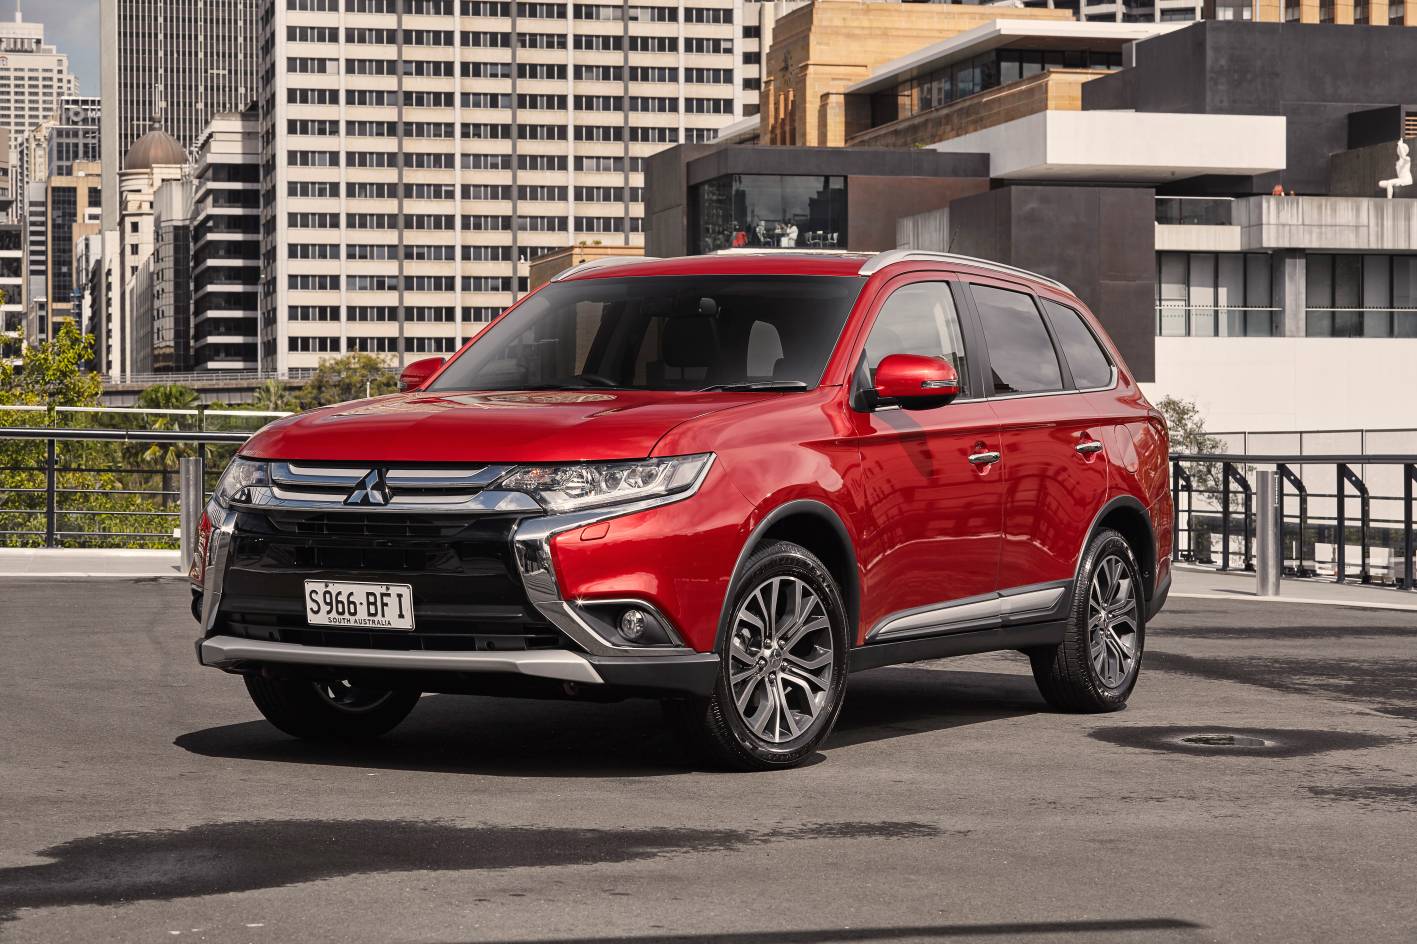 Mitsubishi Cars News 2016 Outlander on sale now from